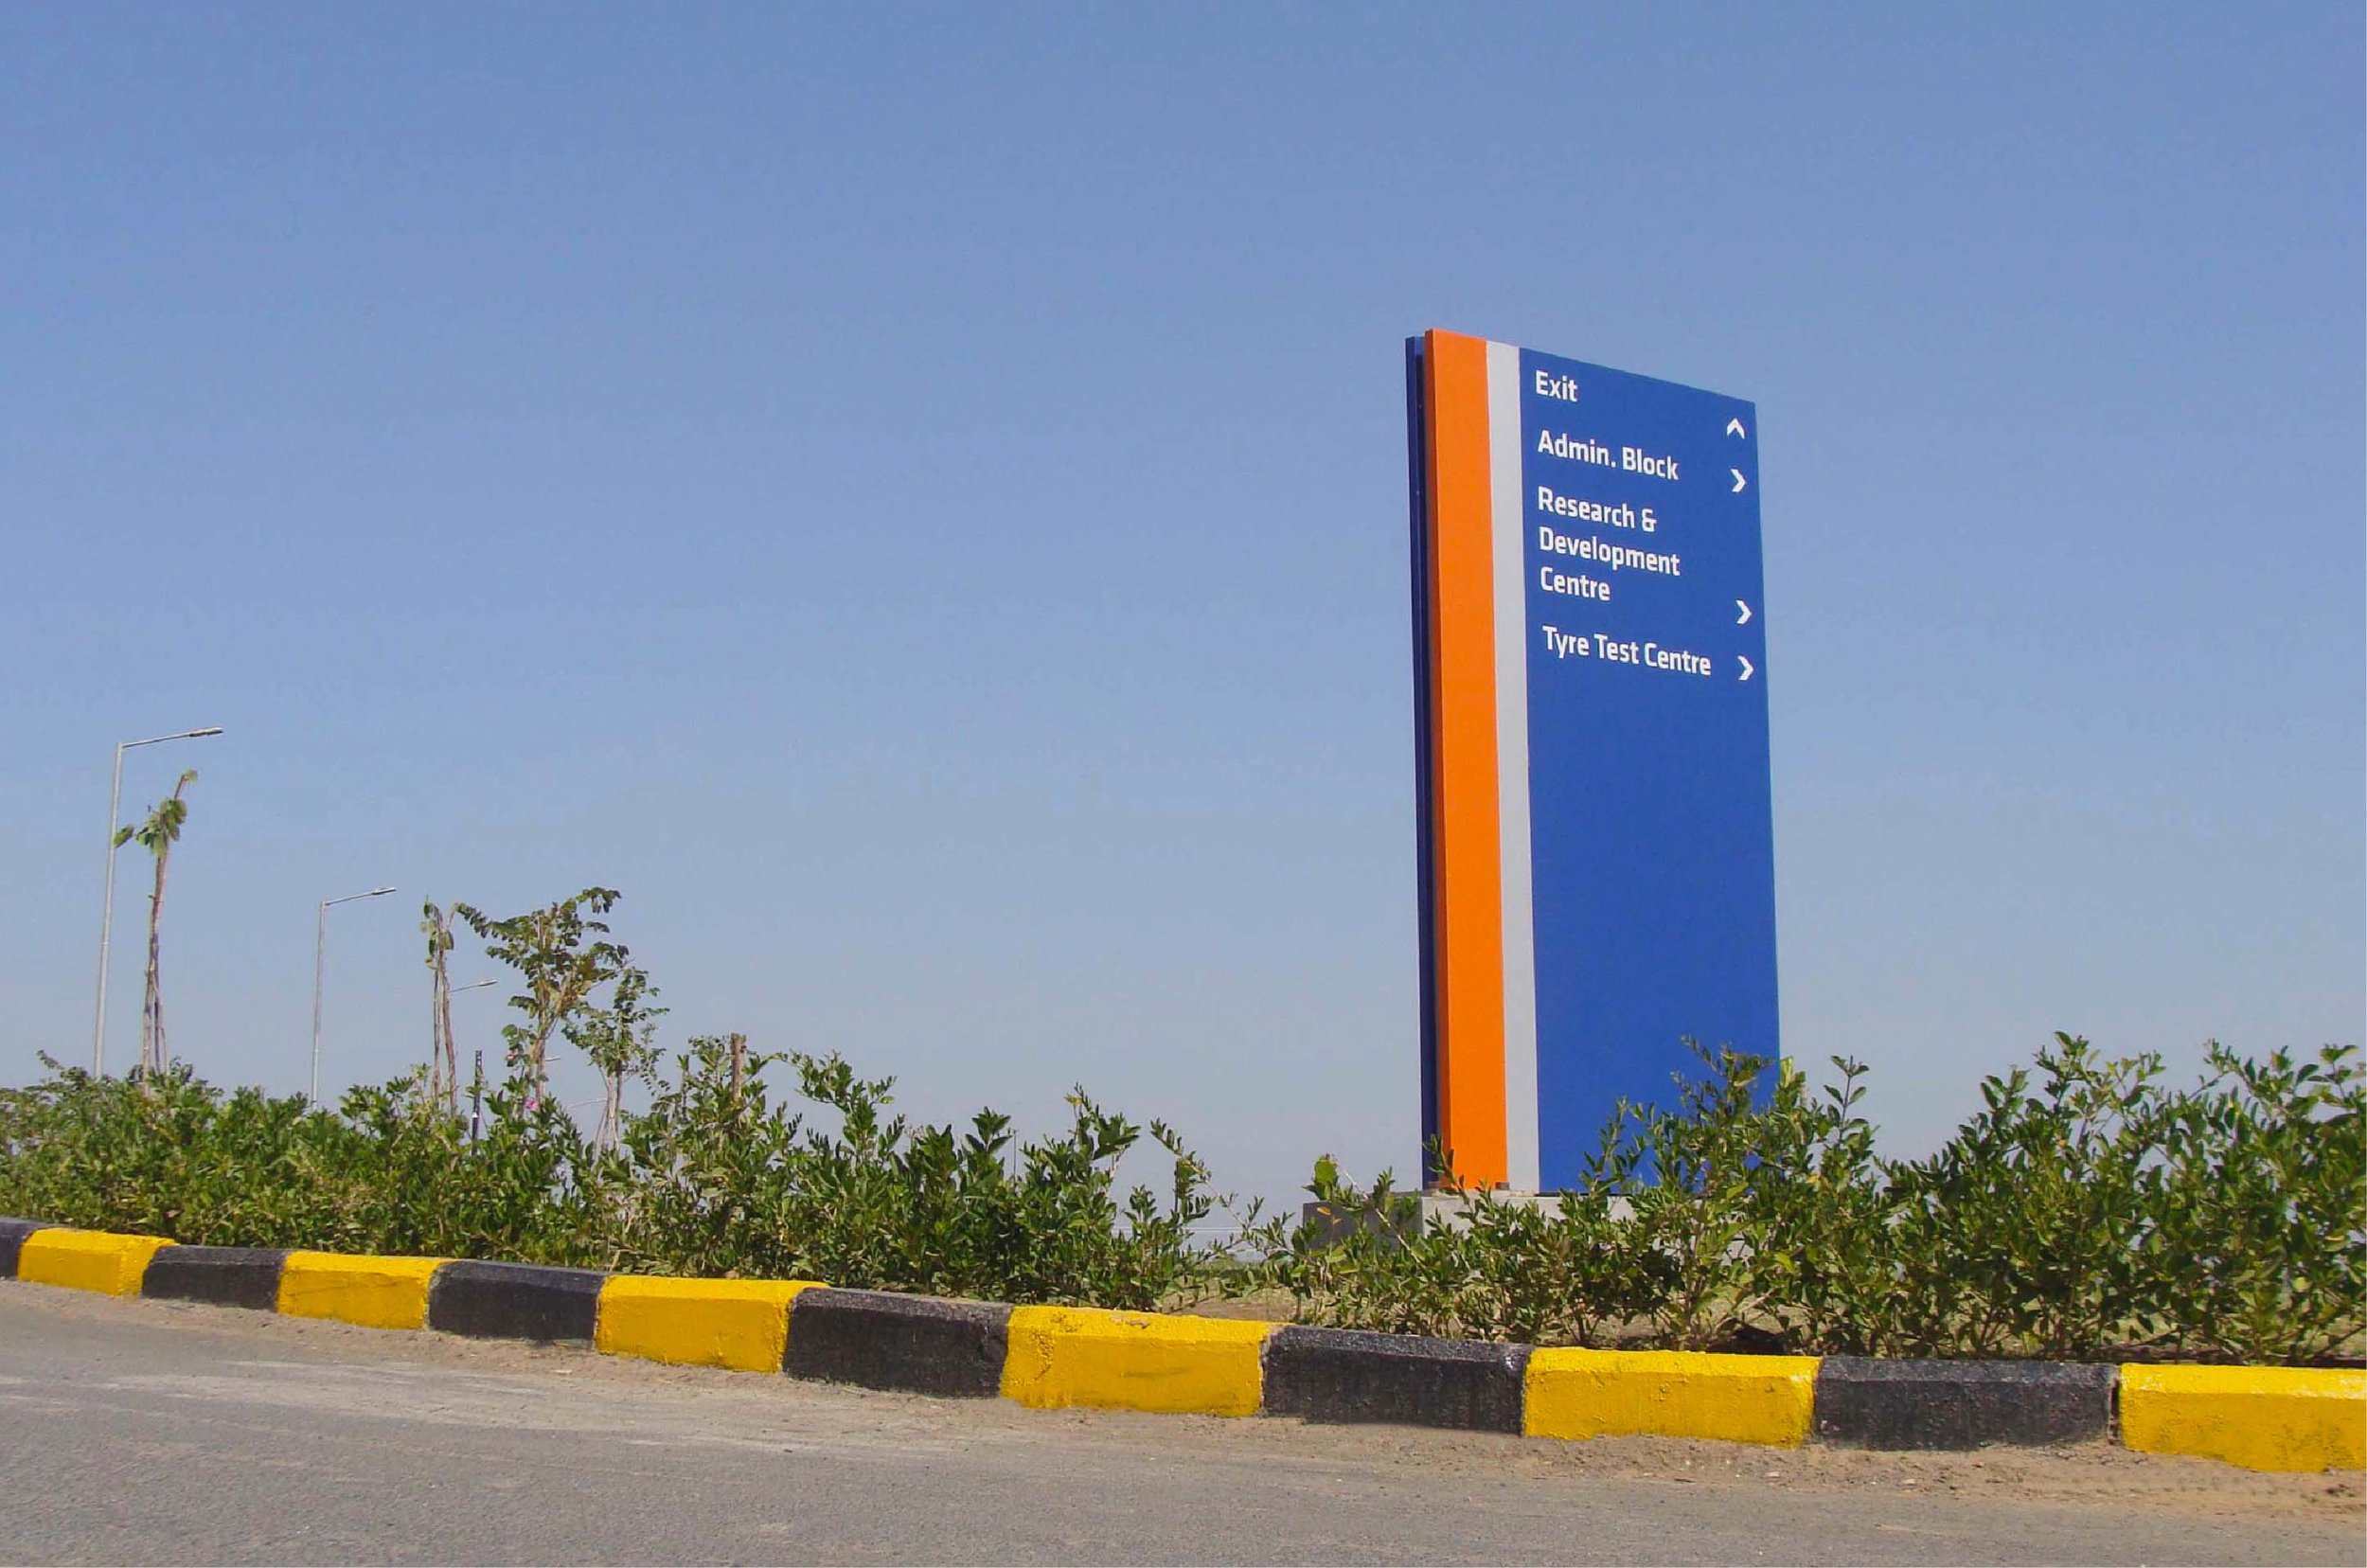 CEAT factory Signages_Branded Spaces_Elephant Design_7.jpg